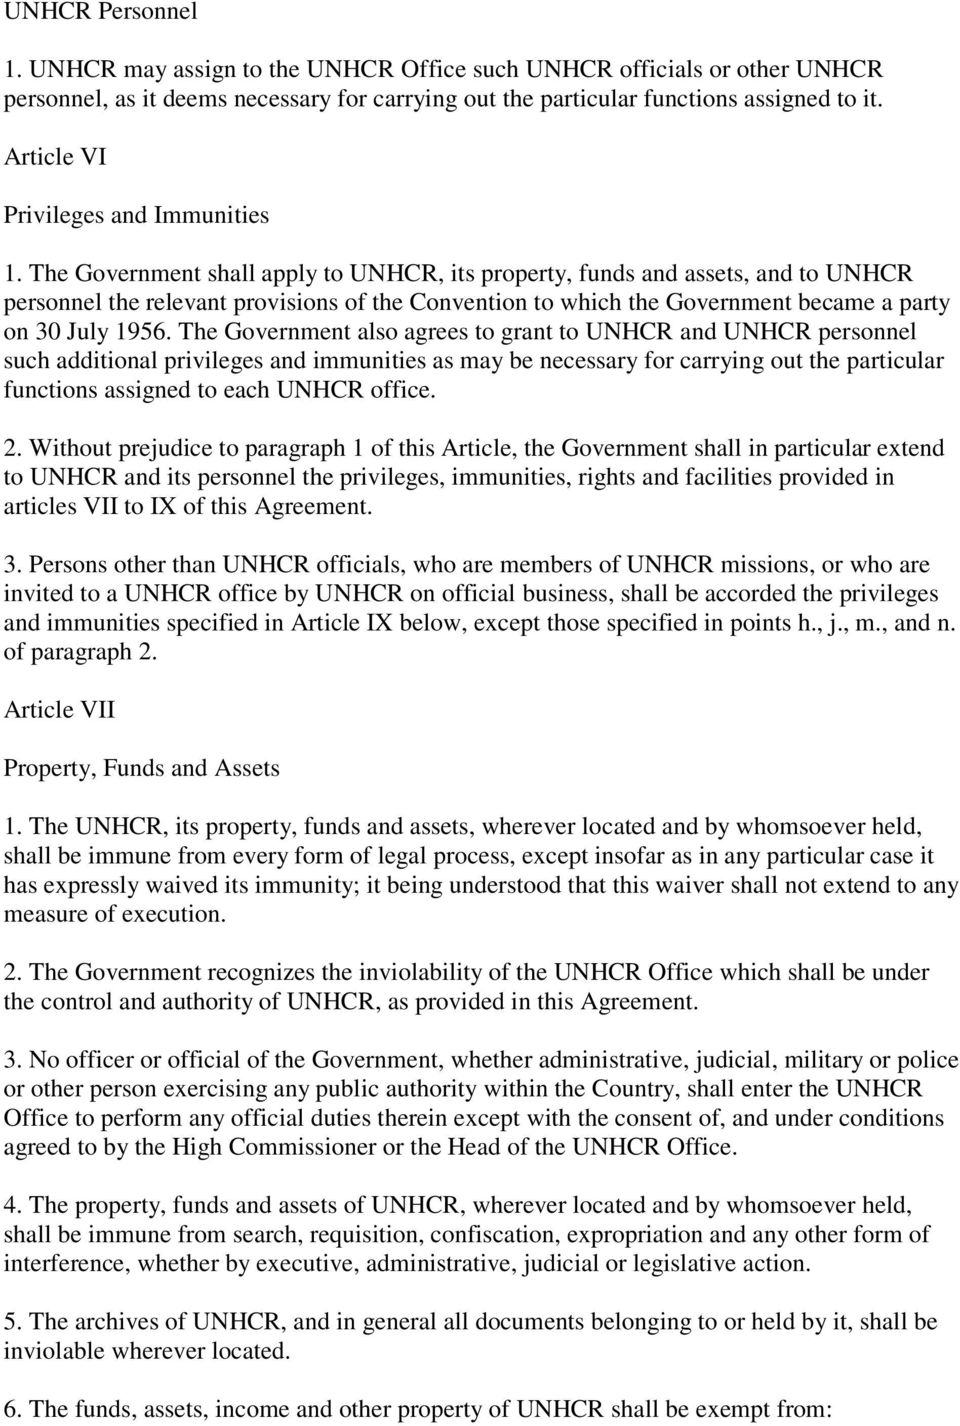 The Government shall apply to UNHCR, its property, funds and assets, and to UNHCR personnel the relevant provisions of the Convention to which the Government became a party on 30 July 1956.